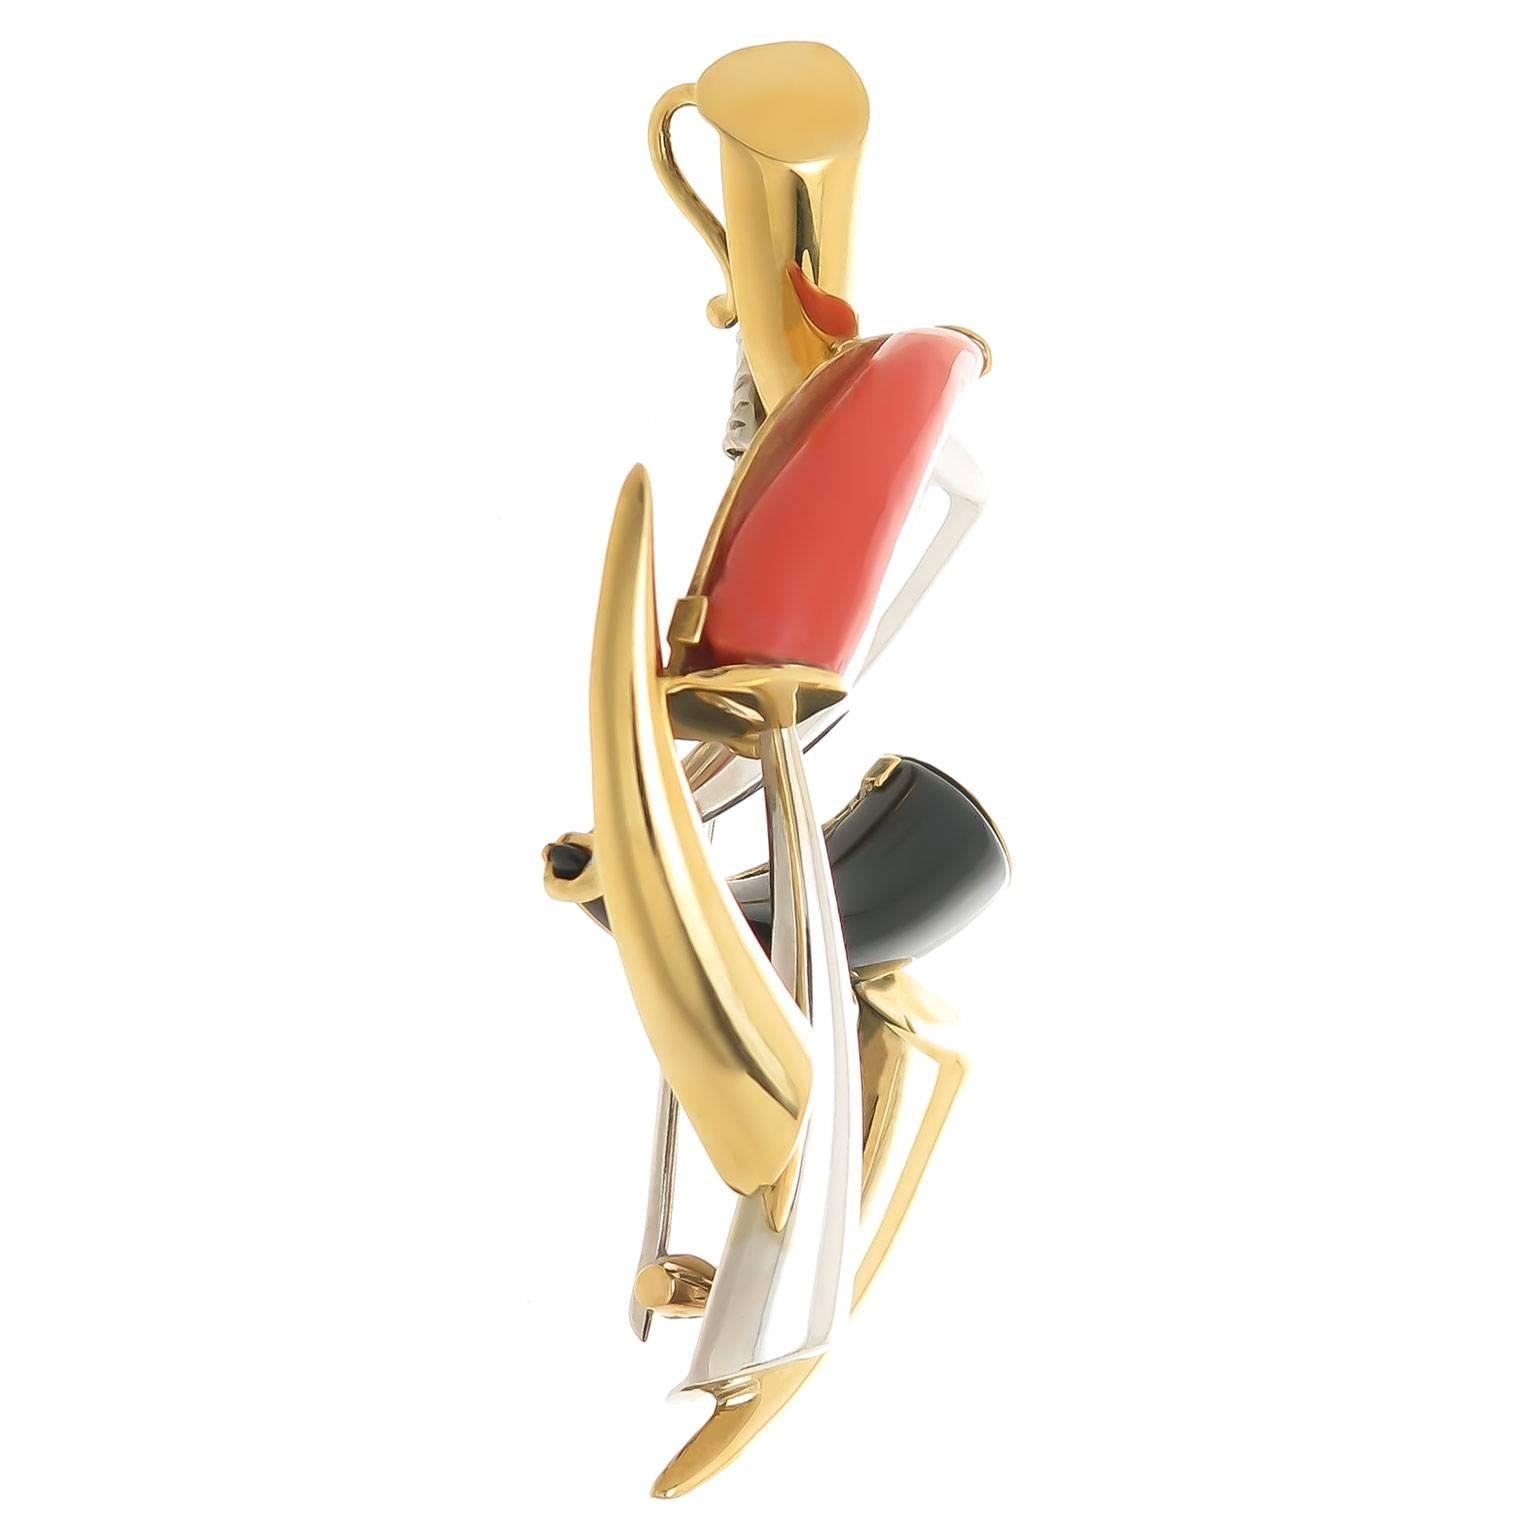 Circa 1960s Cartier Mid Century Modern Pendant Brooch 18K Yellow and White Gold and set with Coral and Black Onyx, measuring 2 1/2 inch in length and 1 1/2 inch wide. Signed, Numbered and extremely well made.